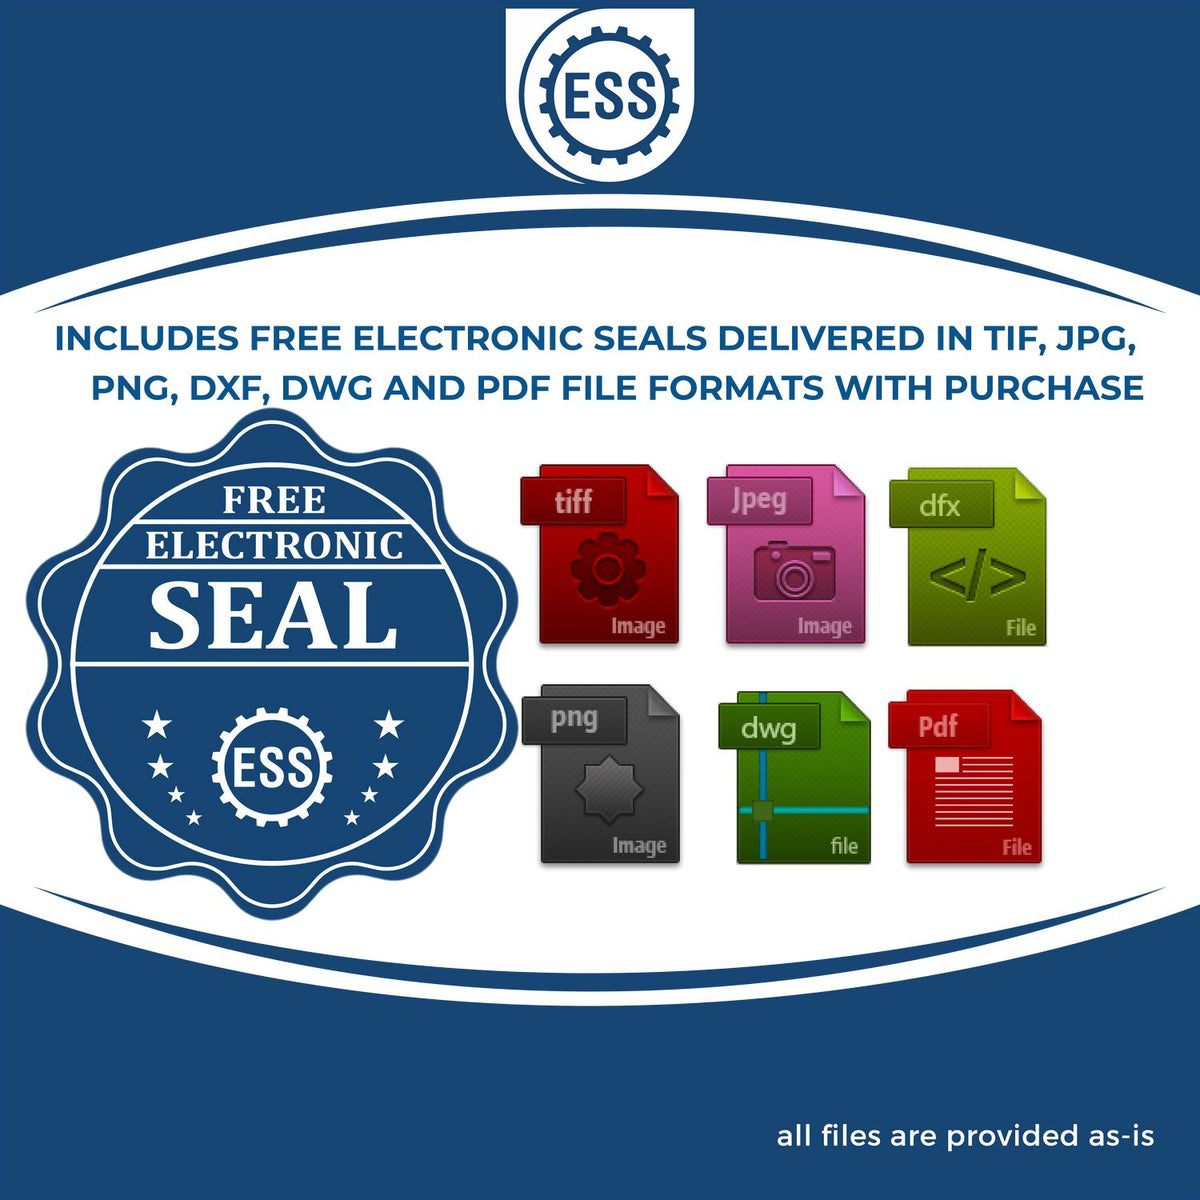 An infographic for the free electronic seal for the Heavy-Duty Nebraska Rectangular Notary Stamp illustrating the different file type icons such as DXF, DWG, TIF, JPG and PNG.